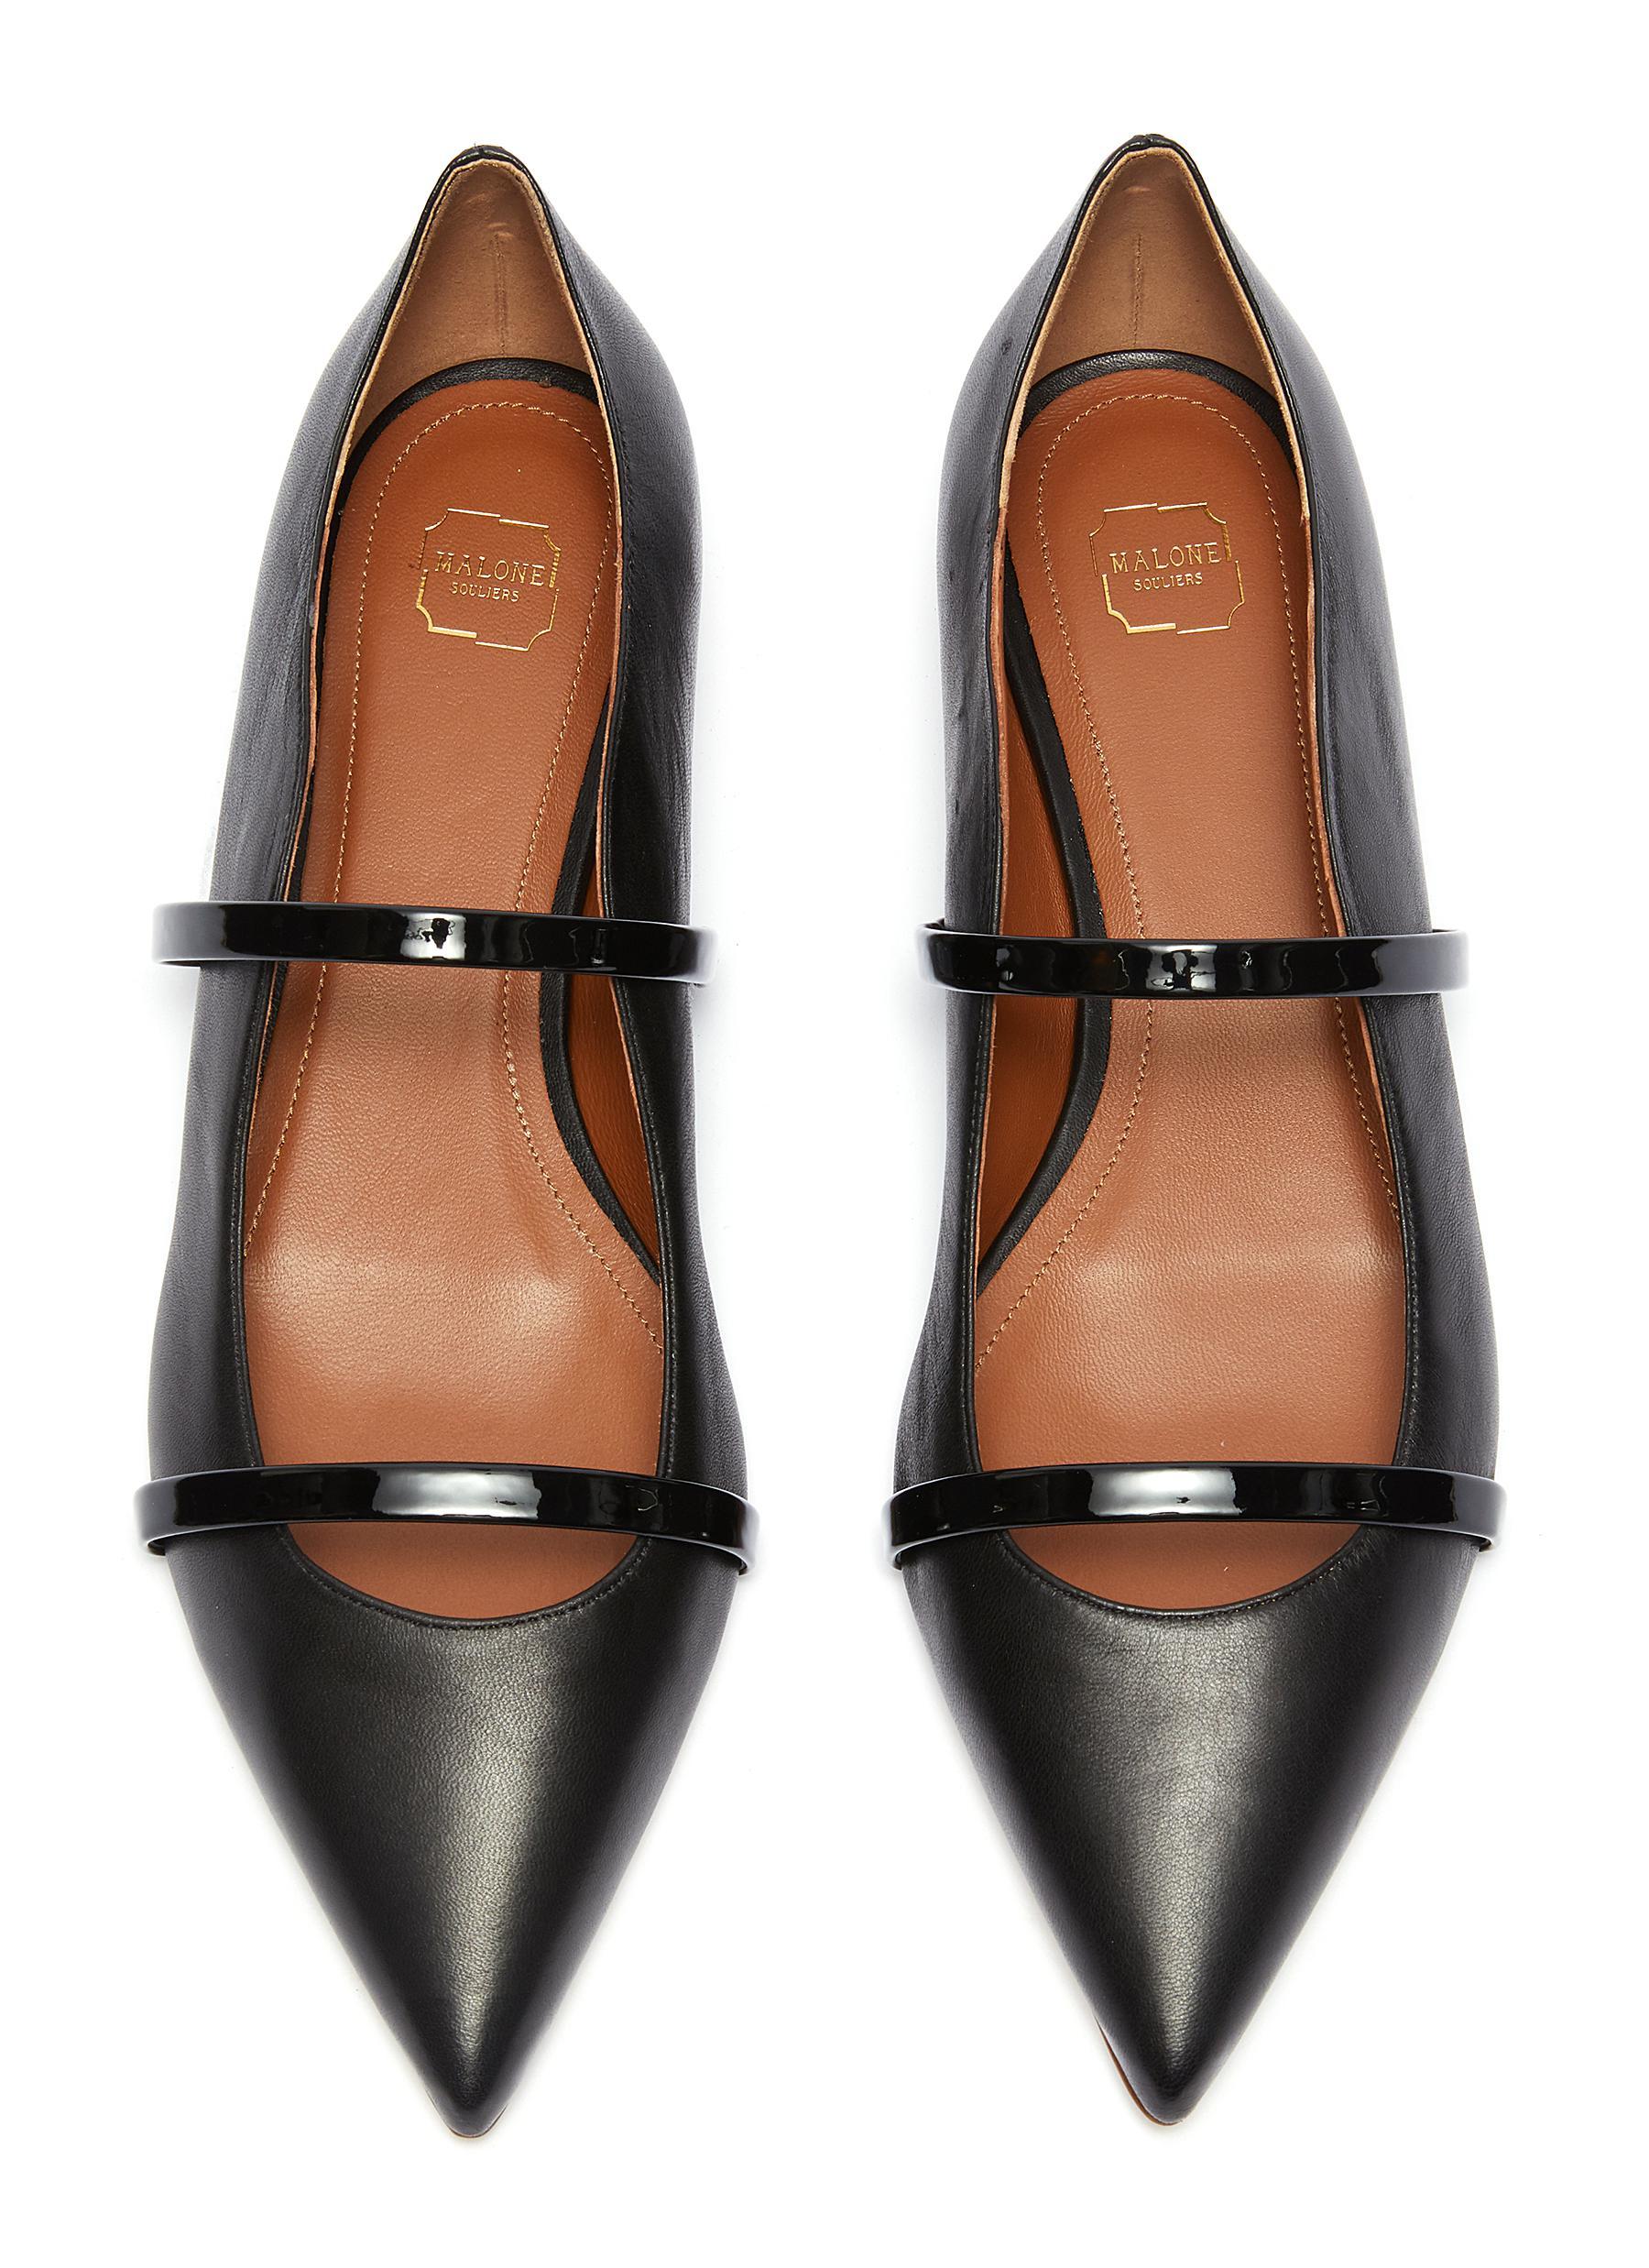 Malone Souliers 'maureen' Strappy Leather Flats in Black - Lyst